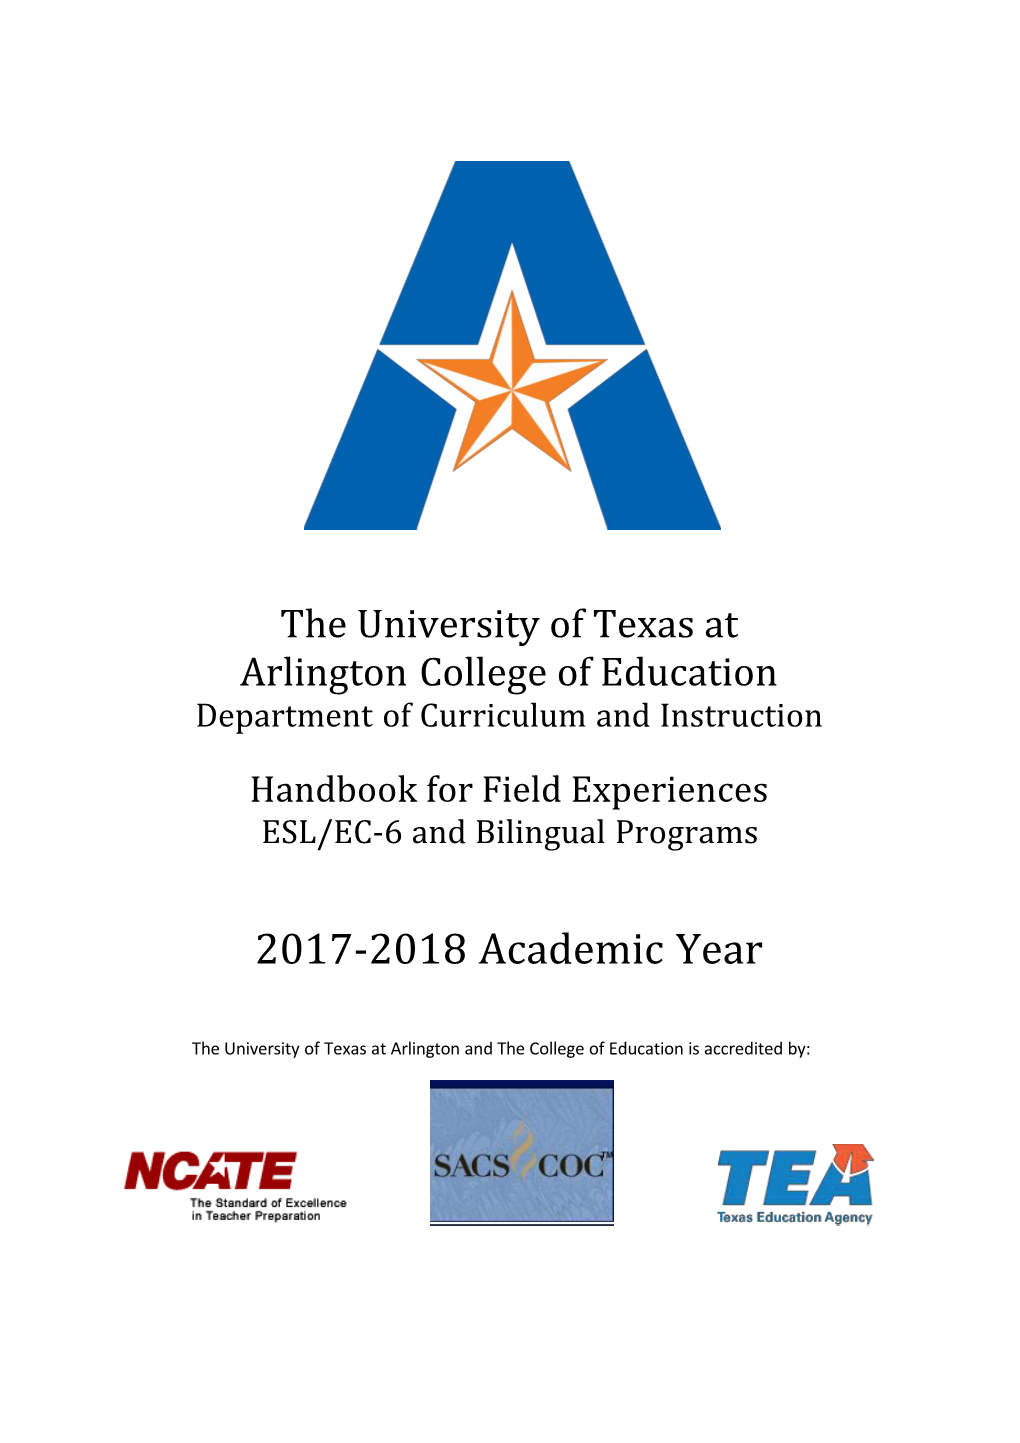 The University of Texas at Arlington College of Education